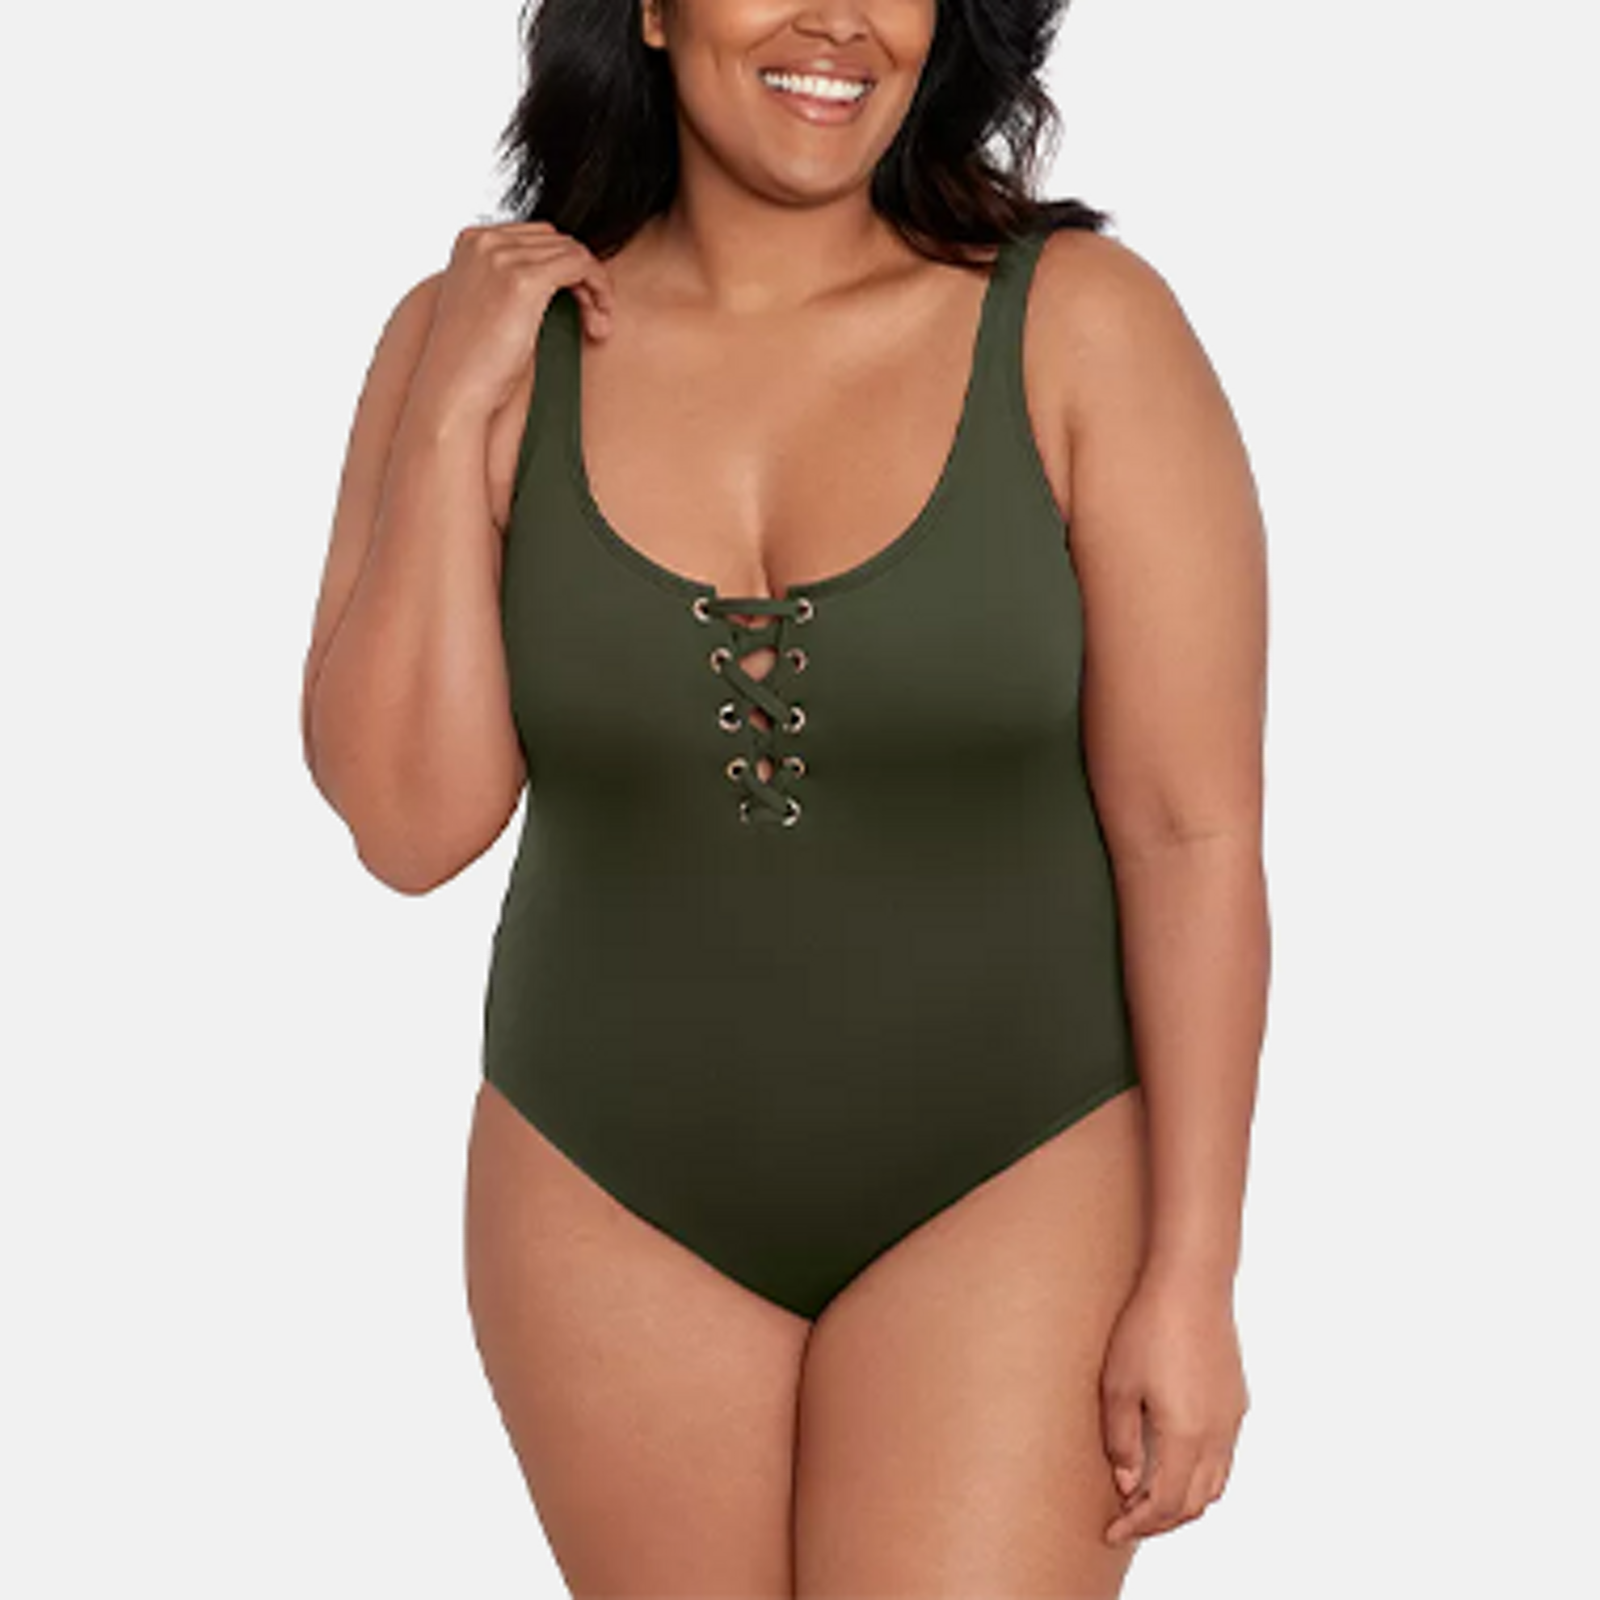 Miraclesuit Colorblock Helix One Piece Swimsuit DDD-Cup